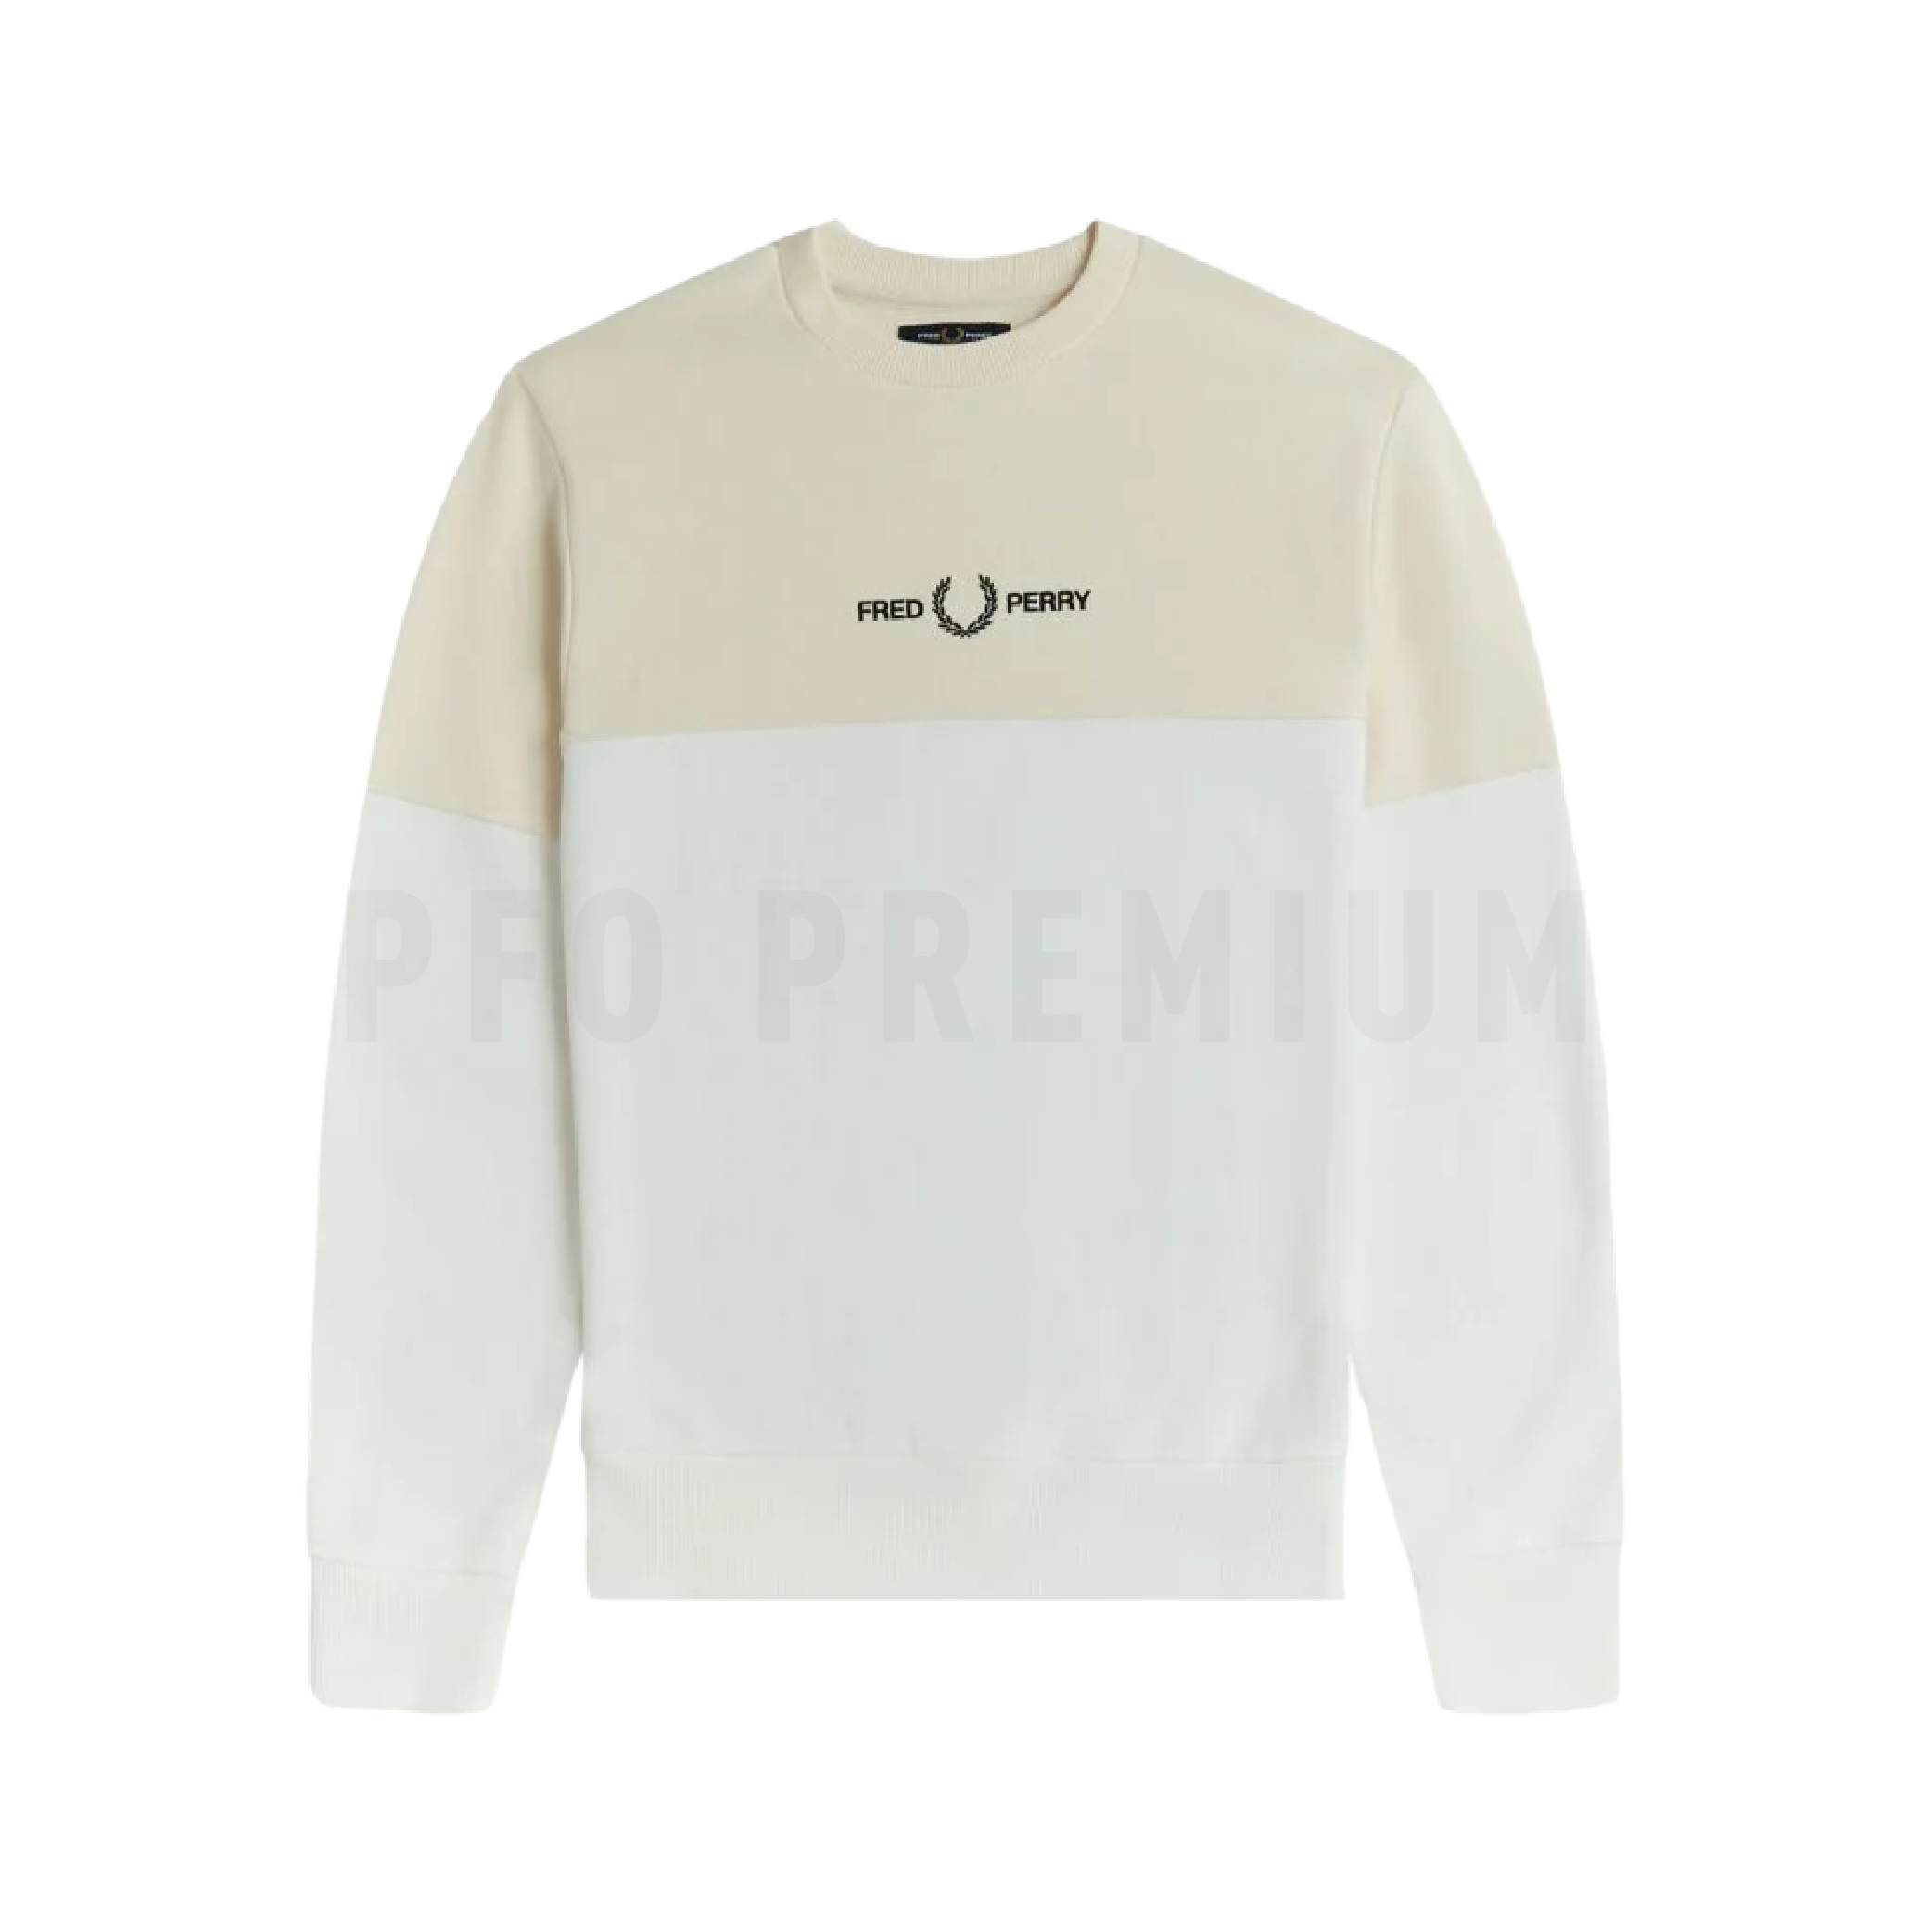 21.03.23 Fred Perry Long Sleeves Tee-01